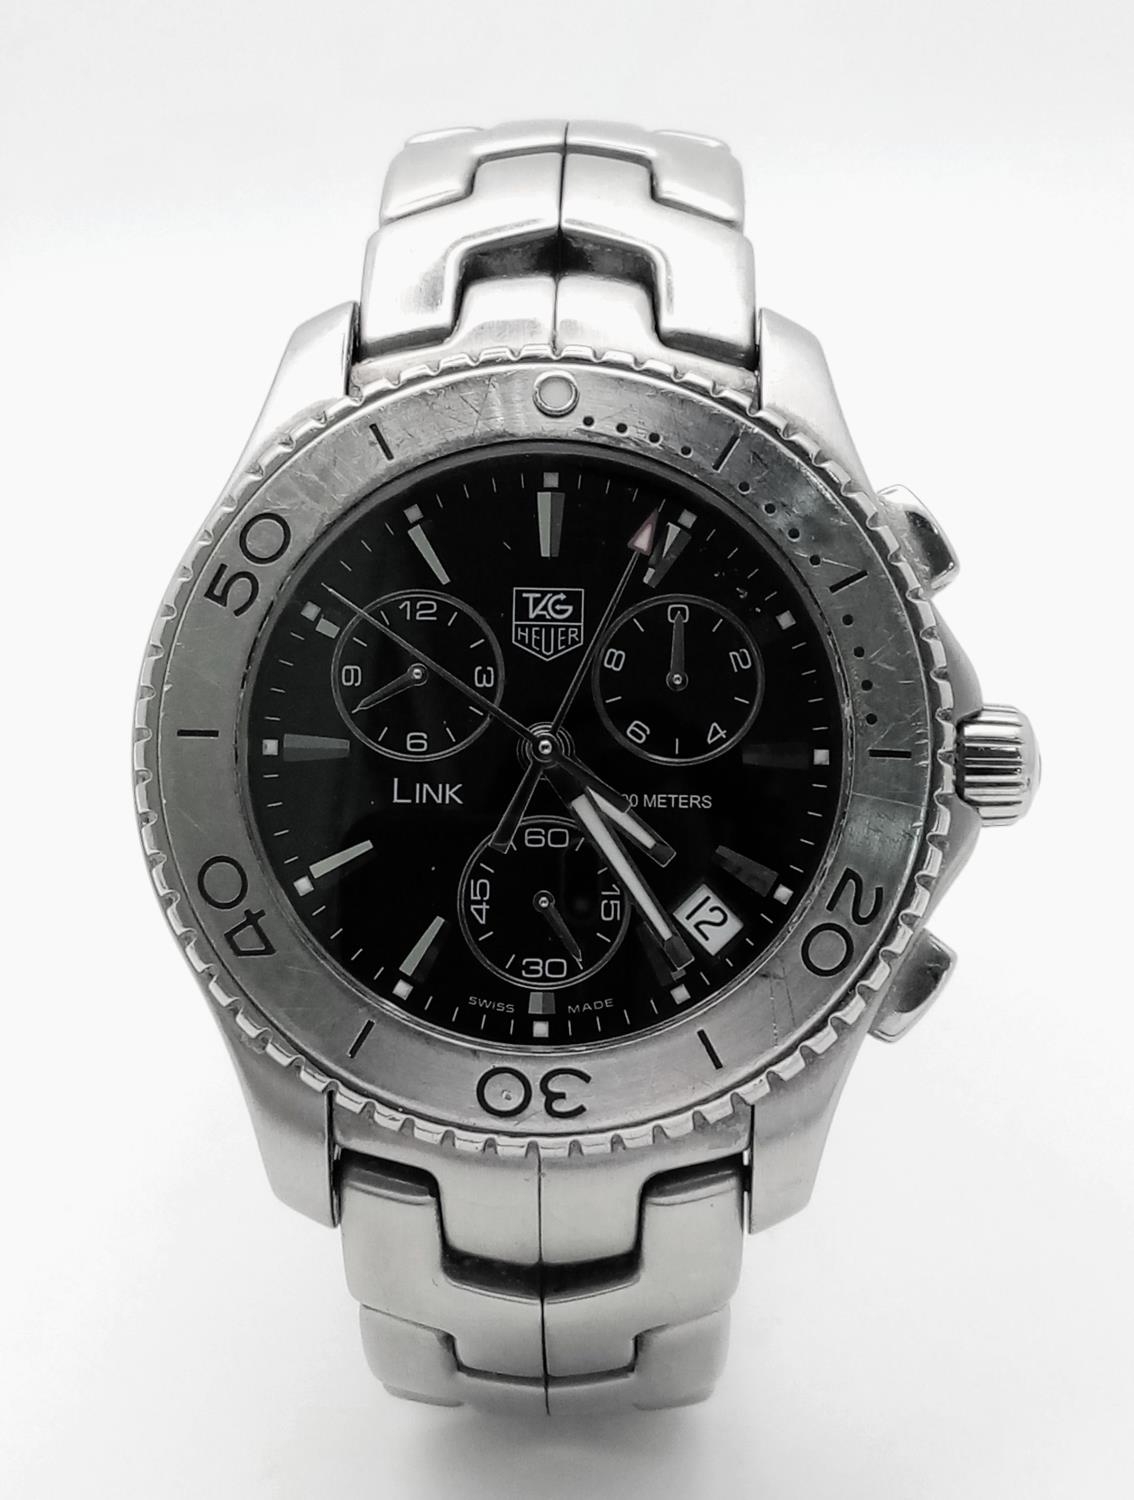 A Tag Heuer Link Quartz Chronograph Gents Watch. Stainless steel bracelet and case - 42mm. Black - Image 4 of 8